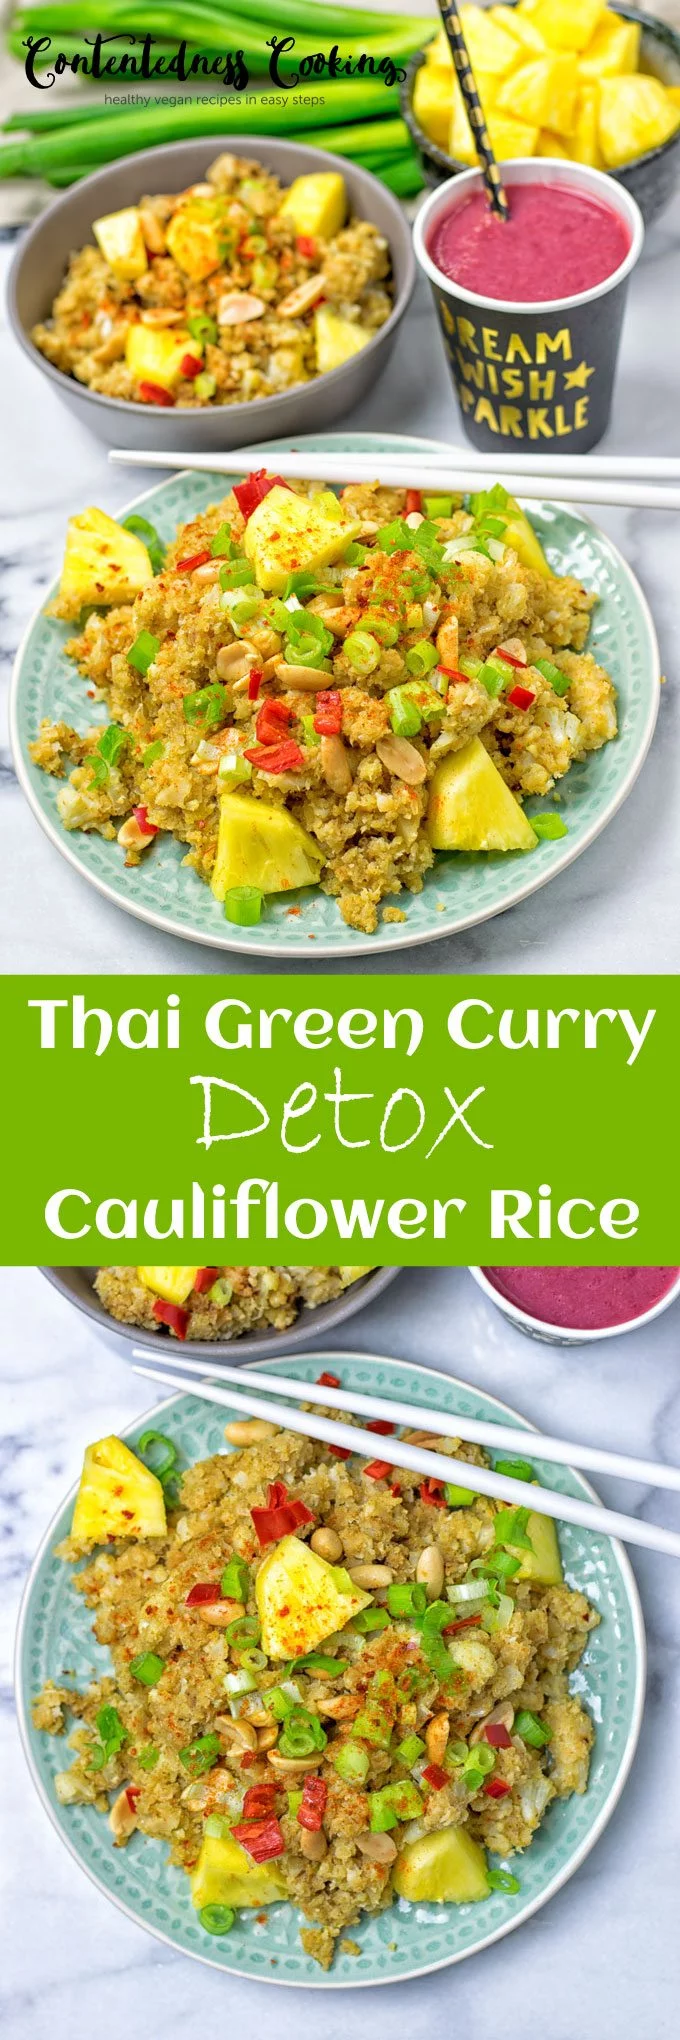 Collage of two pictures of the Thai Green Curry Detox Cauliflower Rice with recipe title text.